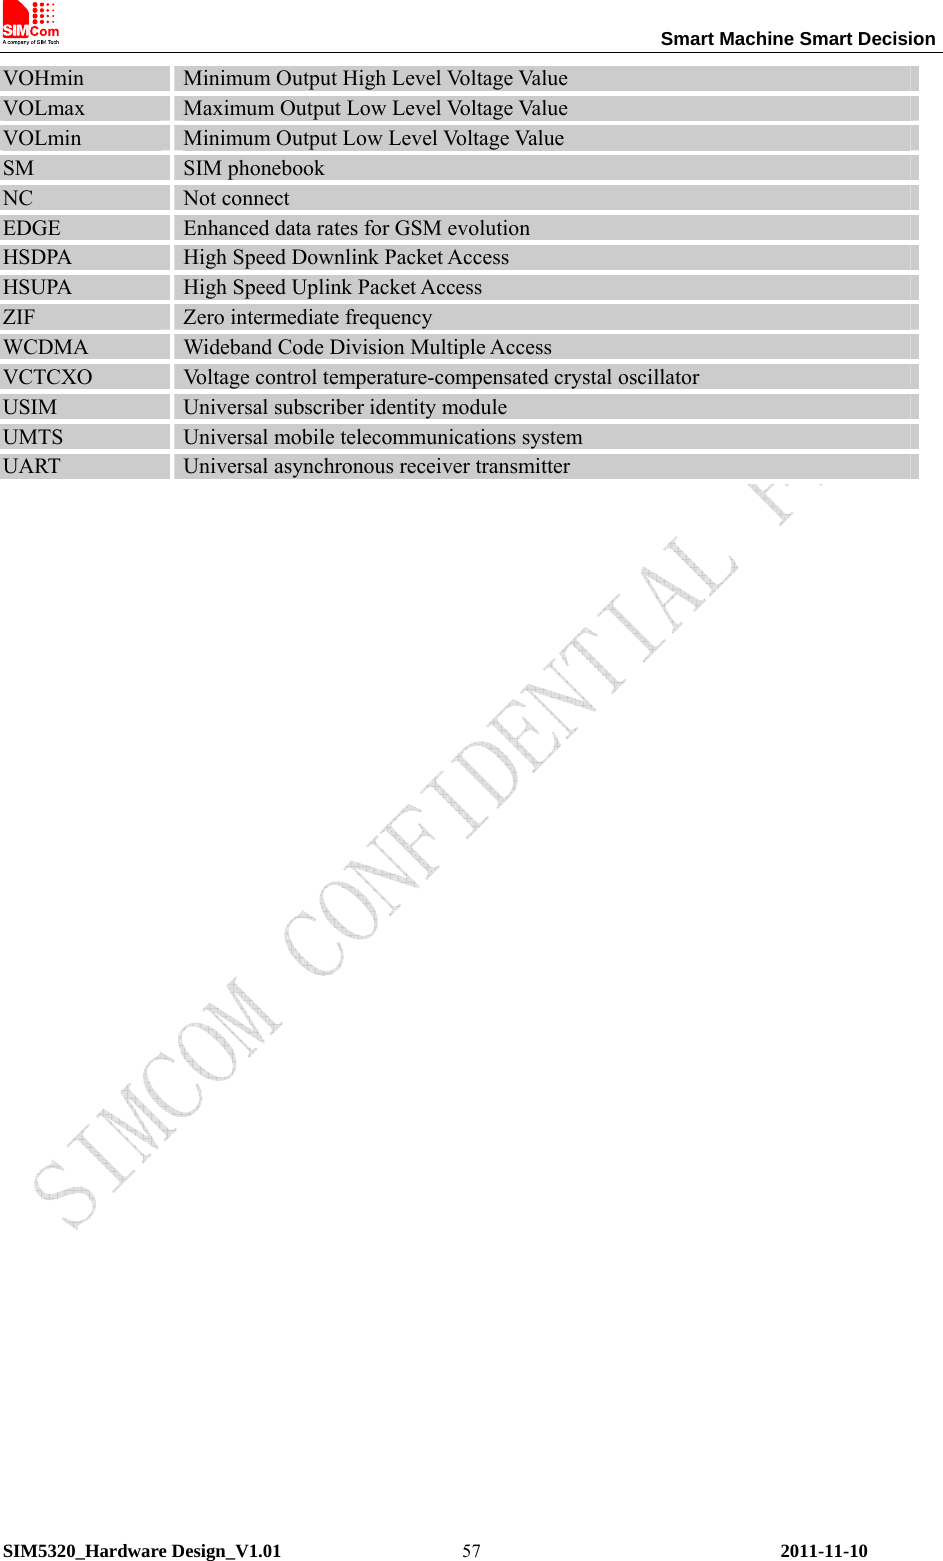                                                                 Smart Machine Smart Decision SIM5320_Hardware Design_V1.01    2011-11-10 57VOHmin  Minimum Output High Level Voltage Value VOLmax  Maximum Output Low Level Voltage Value VOLmin  Minimum Output Low Level Voltage Value SM  SIM phonebook NC  Not connect EDGE  Enhanced data rates for GSM evolution HSDPA  High Speed Downlink Packet Access HSUPA  High Speed Uplink Packet Access ZIF  Zero intermediate frequency WCDMA  Wideband Code Division Multiple Access VCTCXO  Voltage control temperature-compensated crystal oscillator USIM  Universal subscriber identity module UMTS  Universal mobile telecommunications system UART  Universal asynchronous receiver transmitter                               